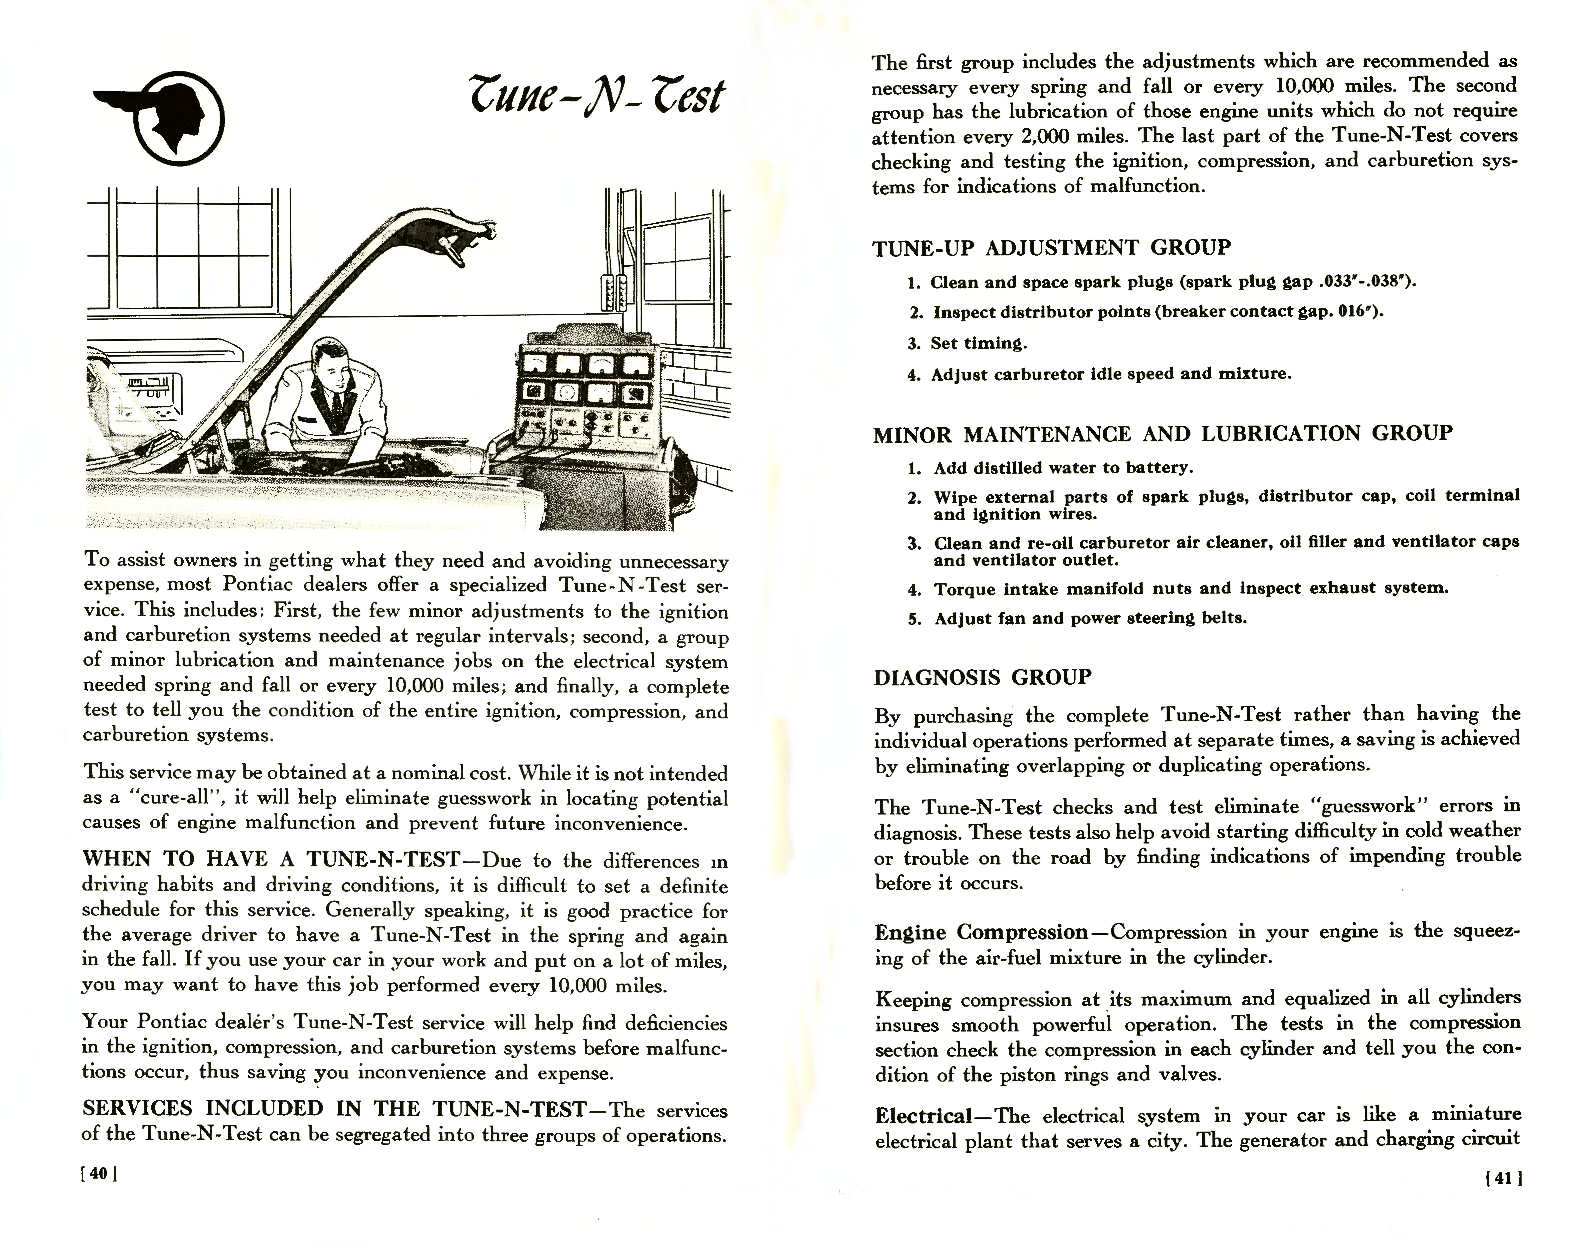 1957_Pontiac_Owners_Guide-40-41